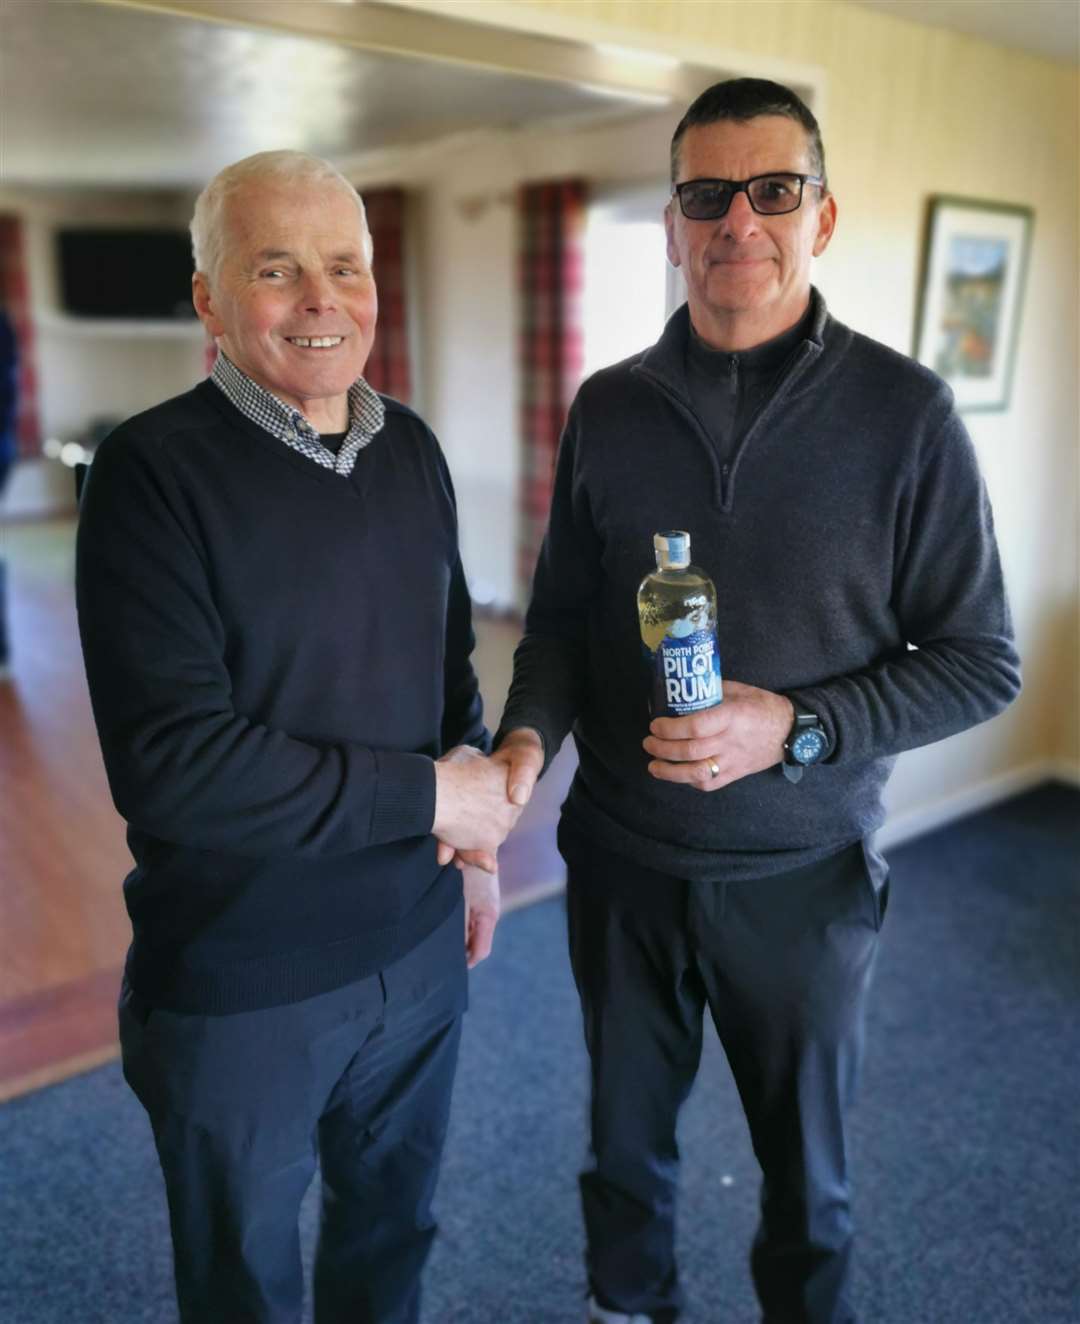 Malcolm Thomson (right) receives a bottle of North Point rum courtesy of the sponsors from Sandy Chisholm, Reay seniors convener.